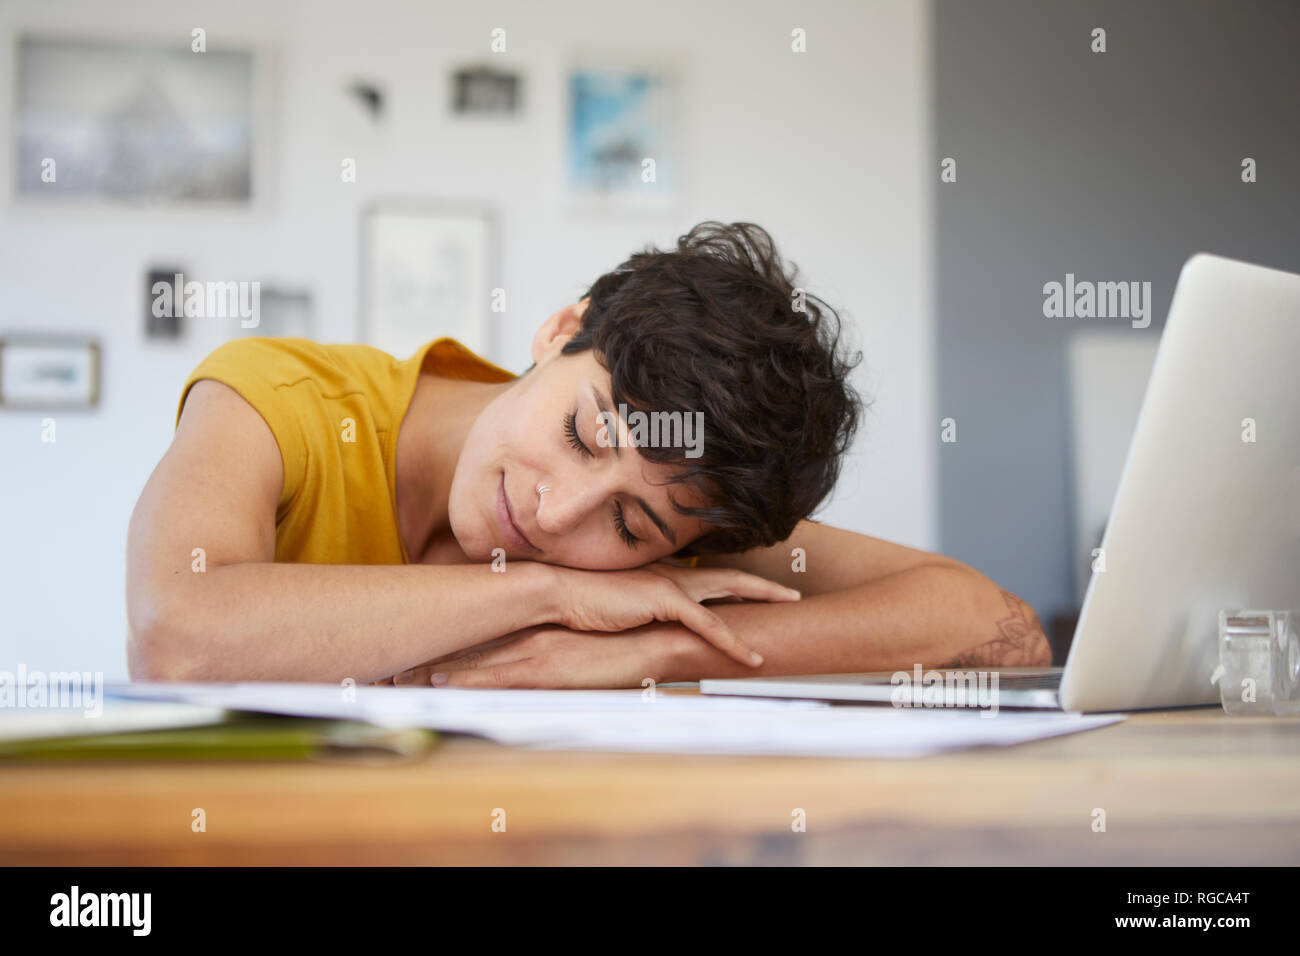 Woman at home resting on table with laptop Stock Photo